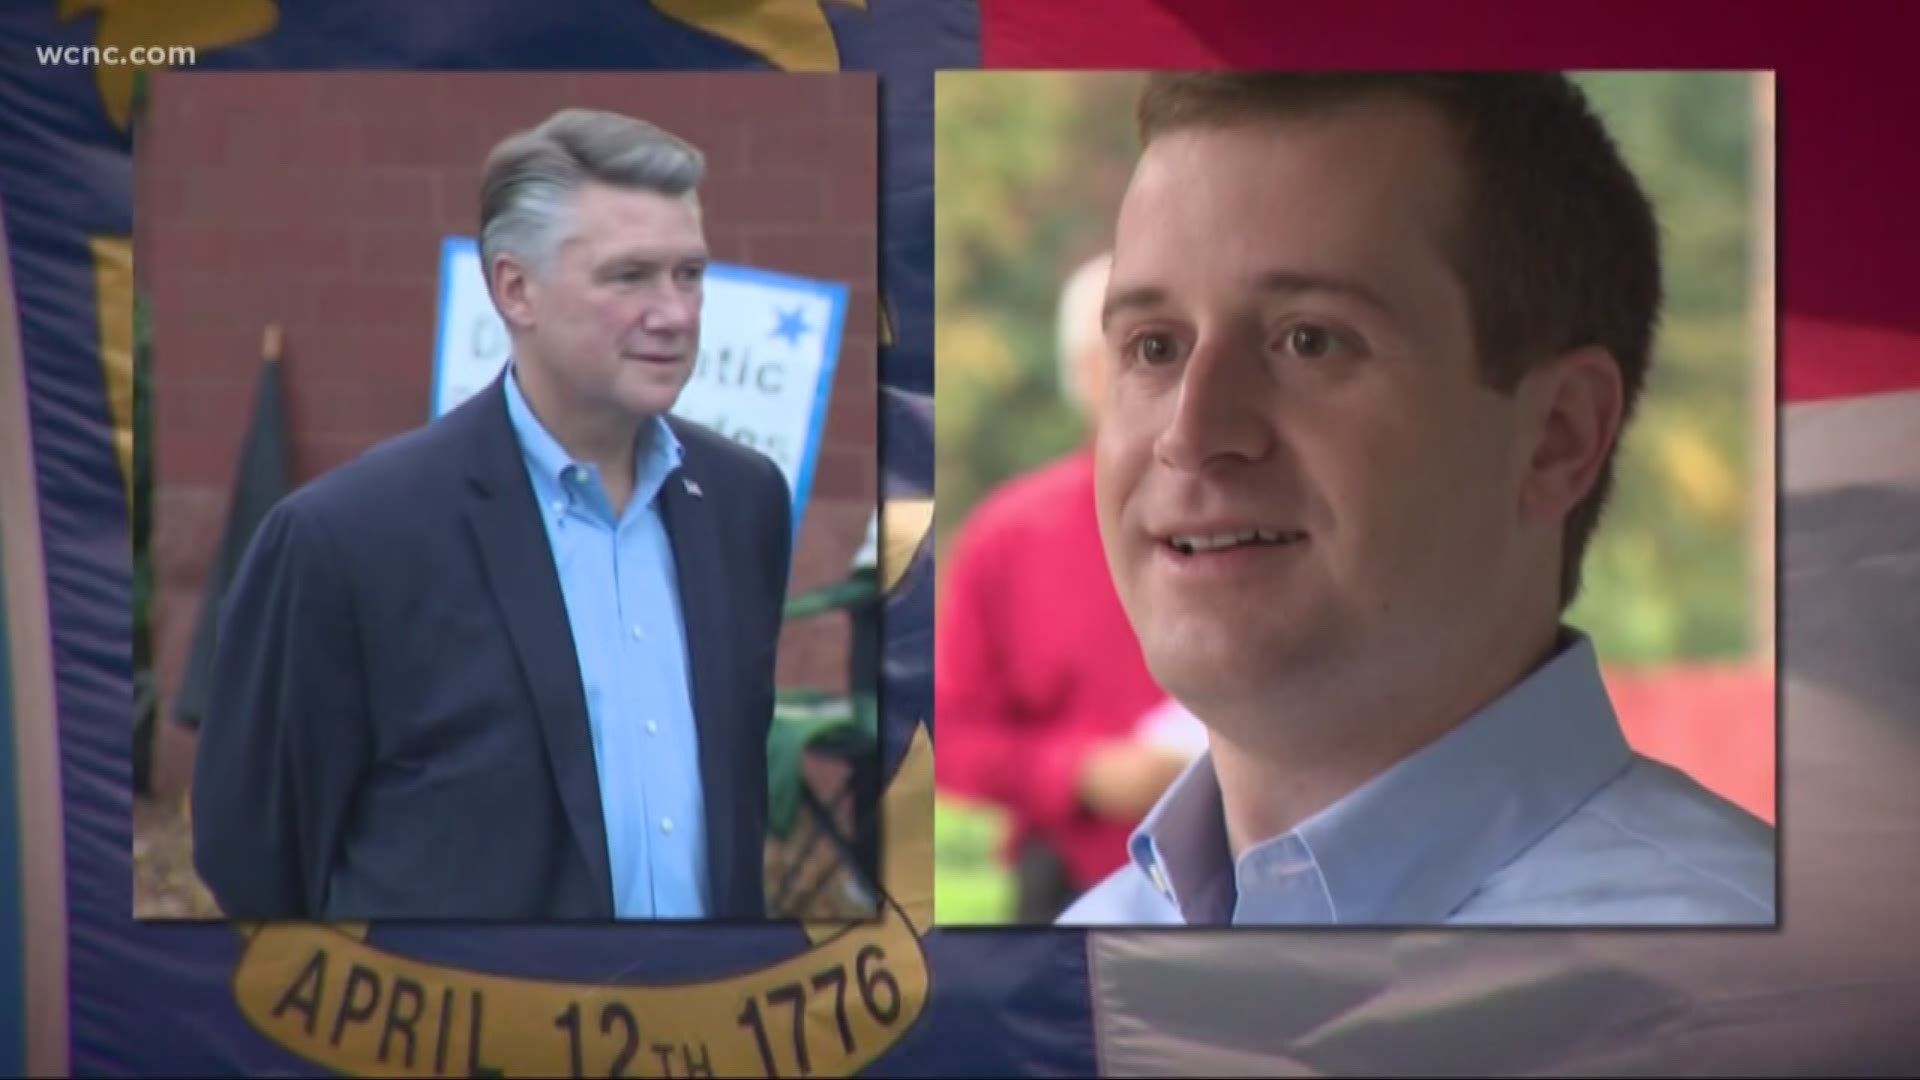 We could soon learn the next step in North Carolina's 9th Congressional District after a judge hears arguments over whether Mark Harris should be certified as the winner.